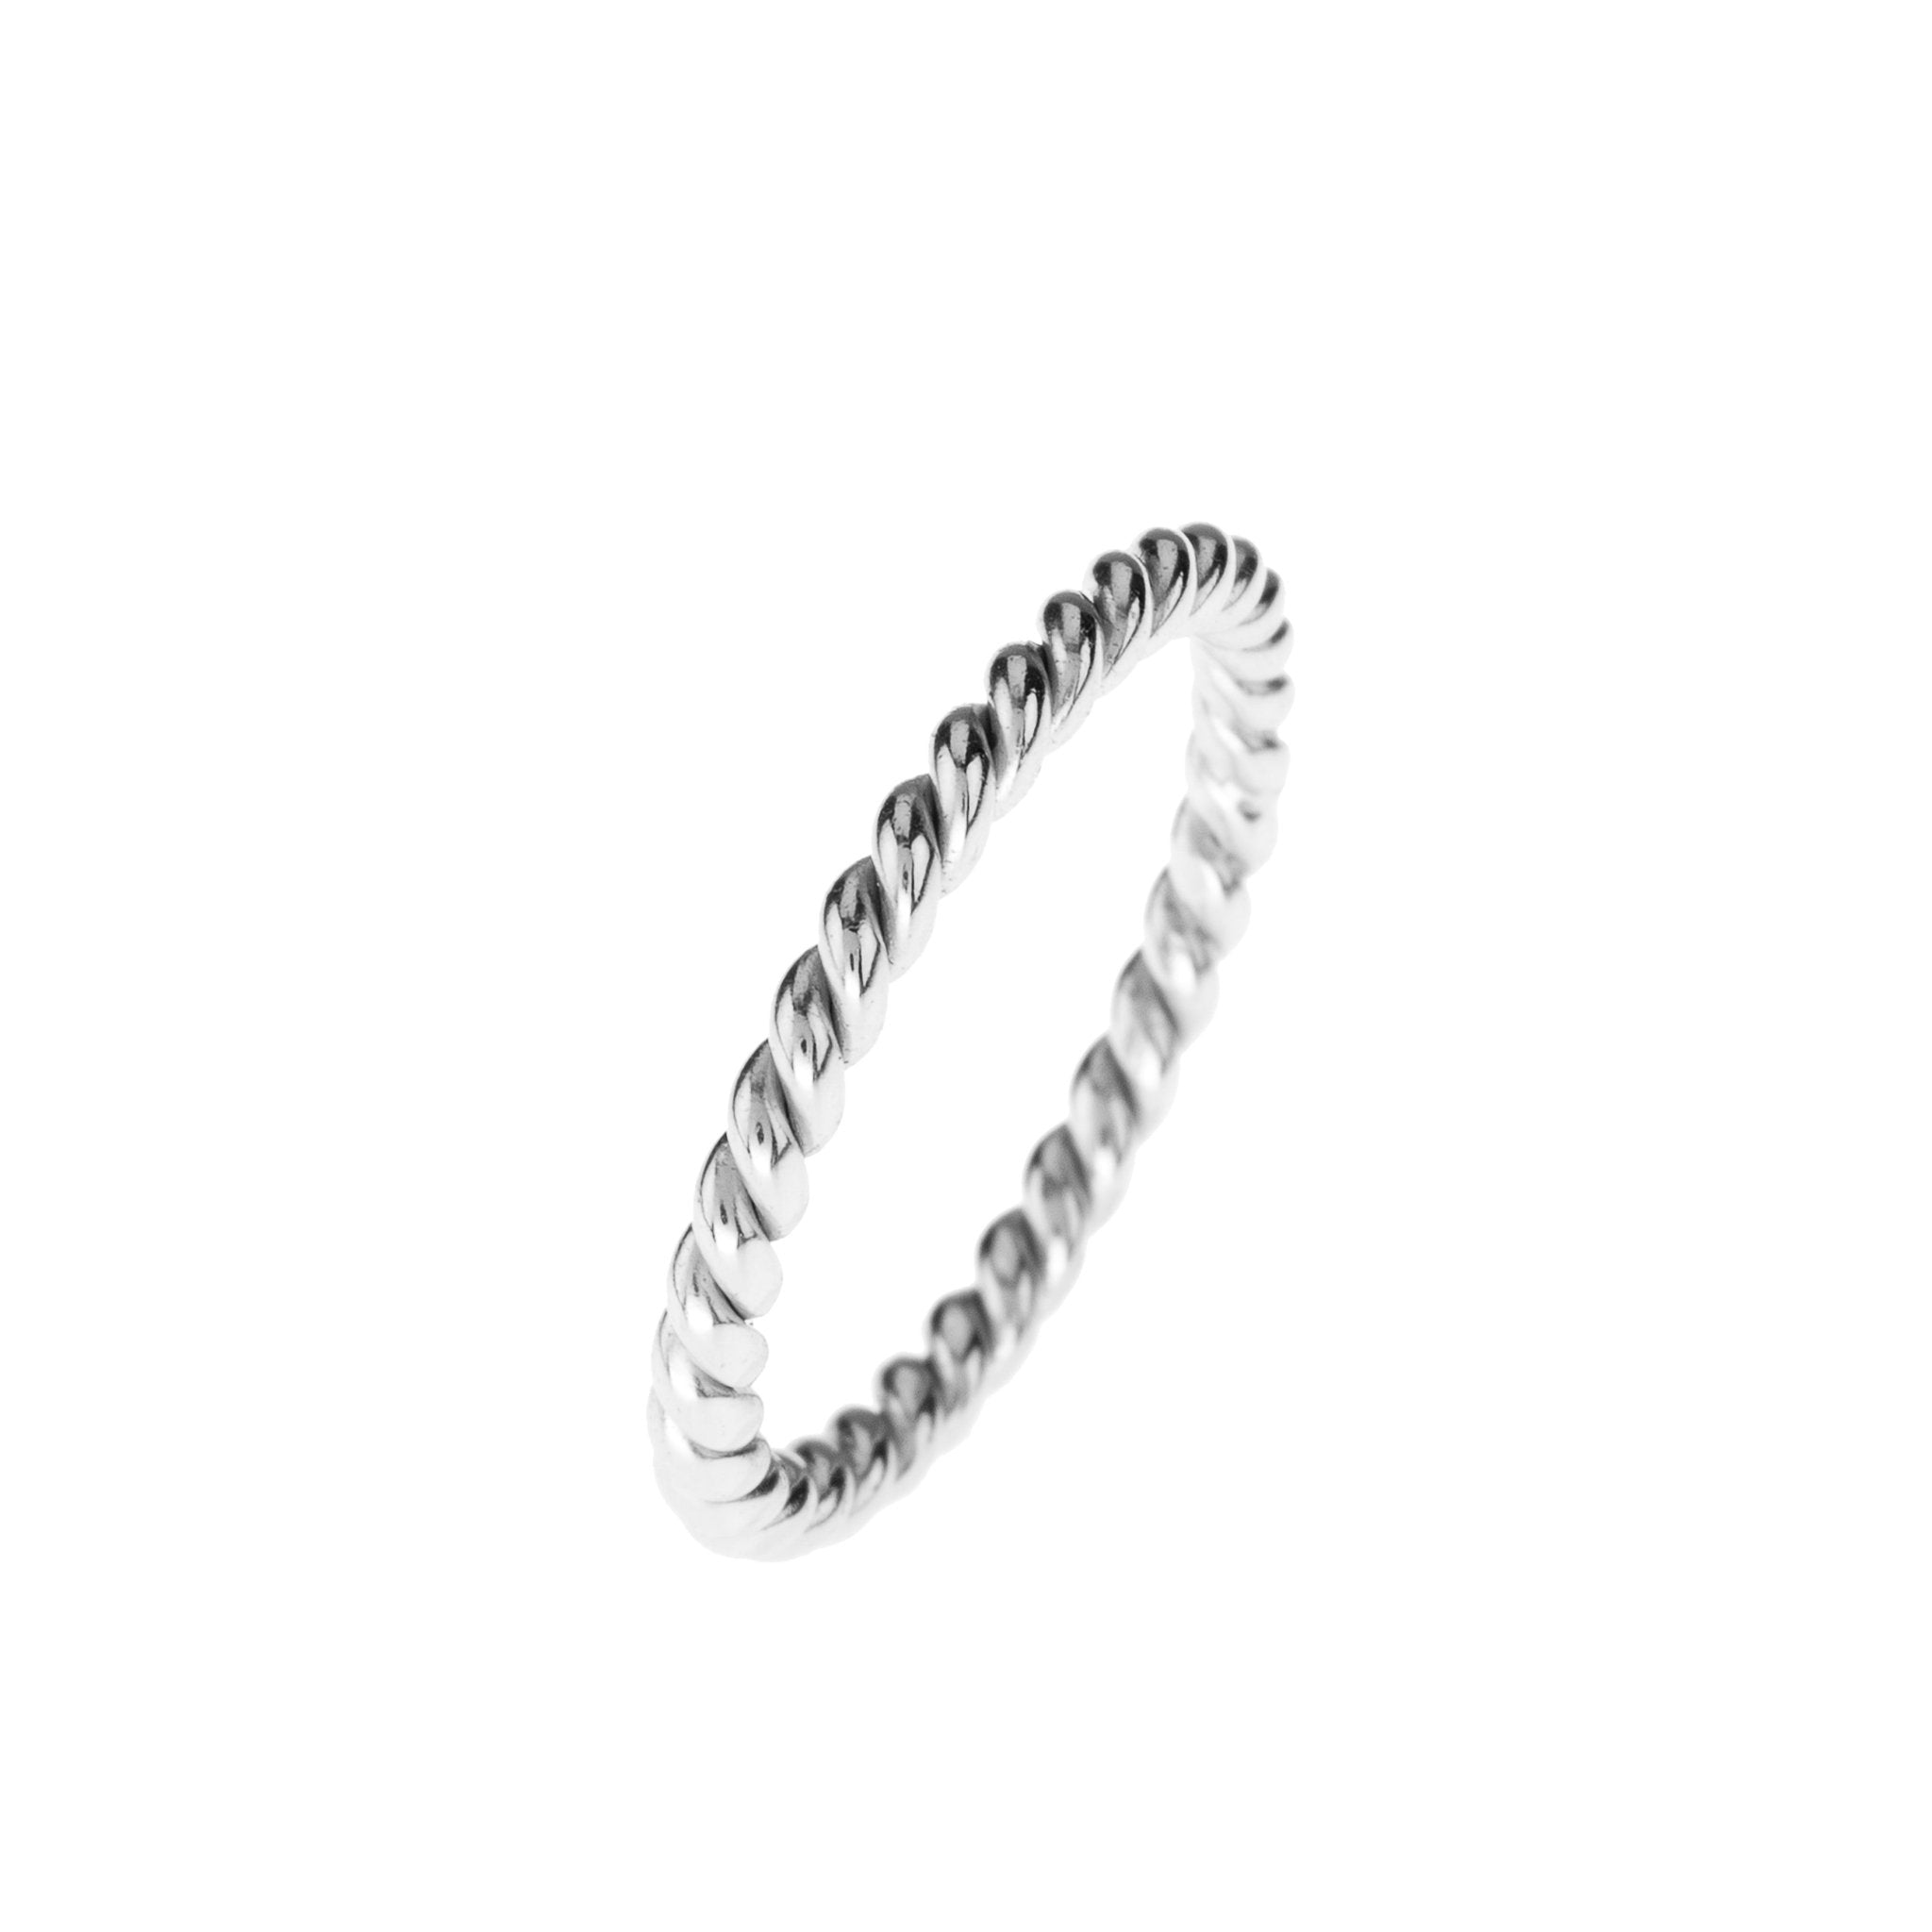 Sample Sale Twisted Flax Stacking Ring Silver Size M - LATELITA Rings